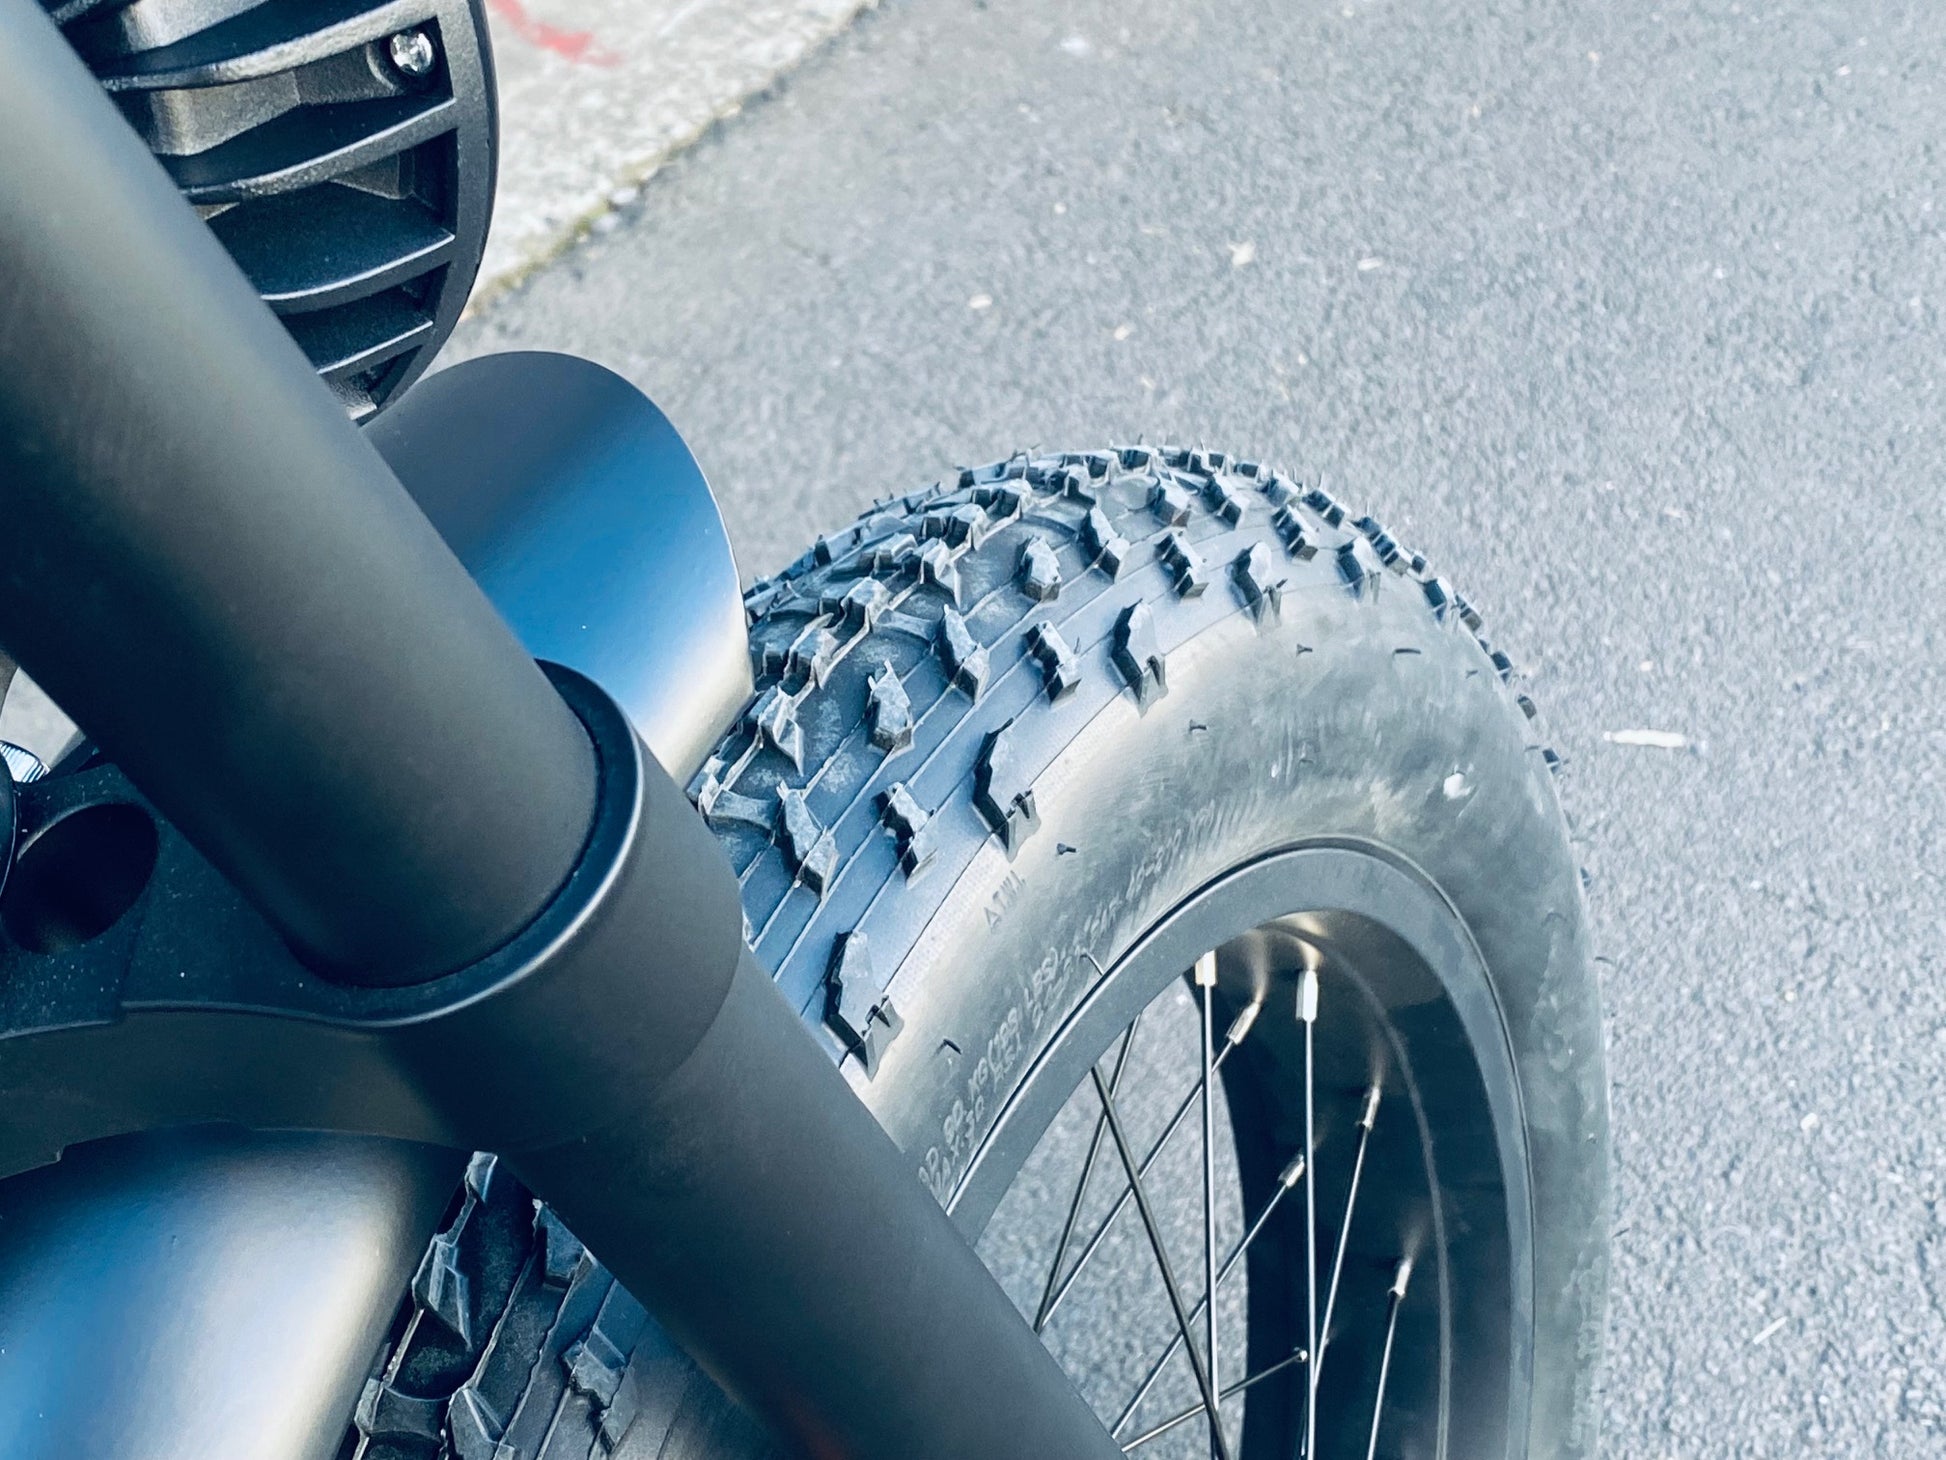 Apache Electric Bike, Modern yet retro 20" fat tyre ebike with performance and packed with features in true SUPER 73 style from Boostbikes.